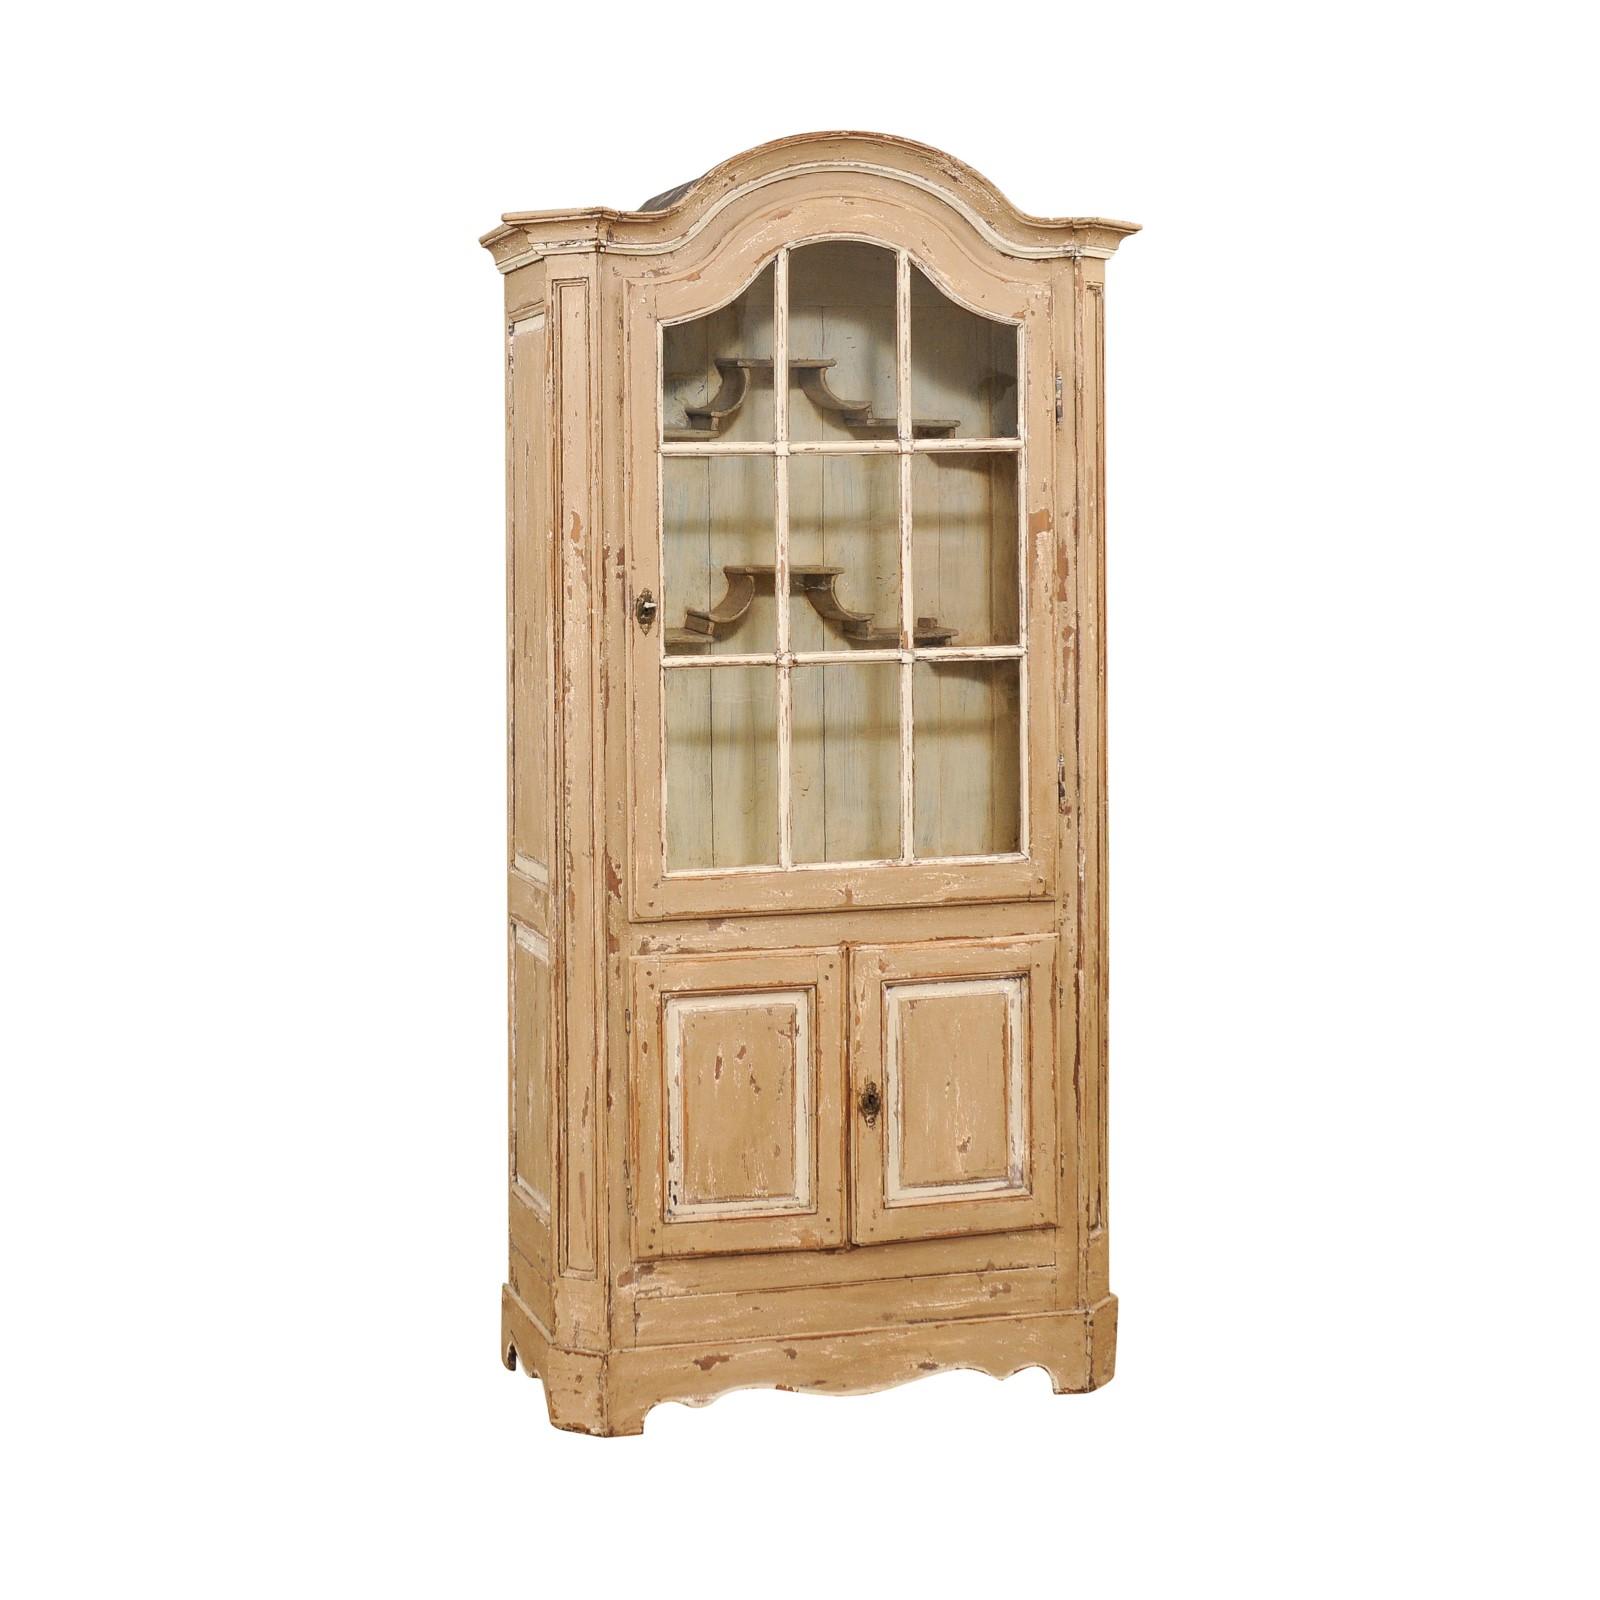 A French painted vitrine cabinet from the 19th century with carved bonnet top, glass door in the upper section and small double doors in the lower one. This French painted vitrine cabinet, originating from the 19th century, seamlessly blends